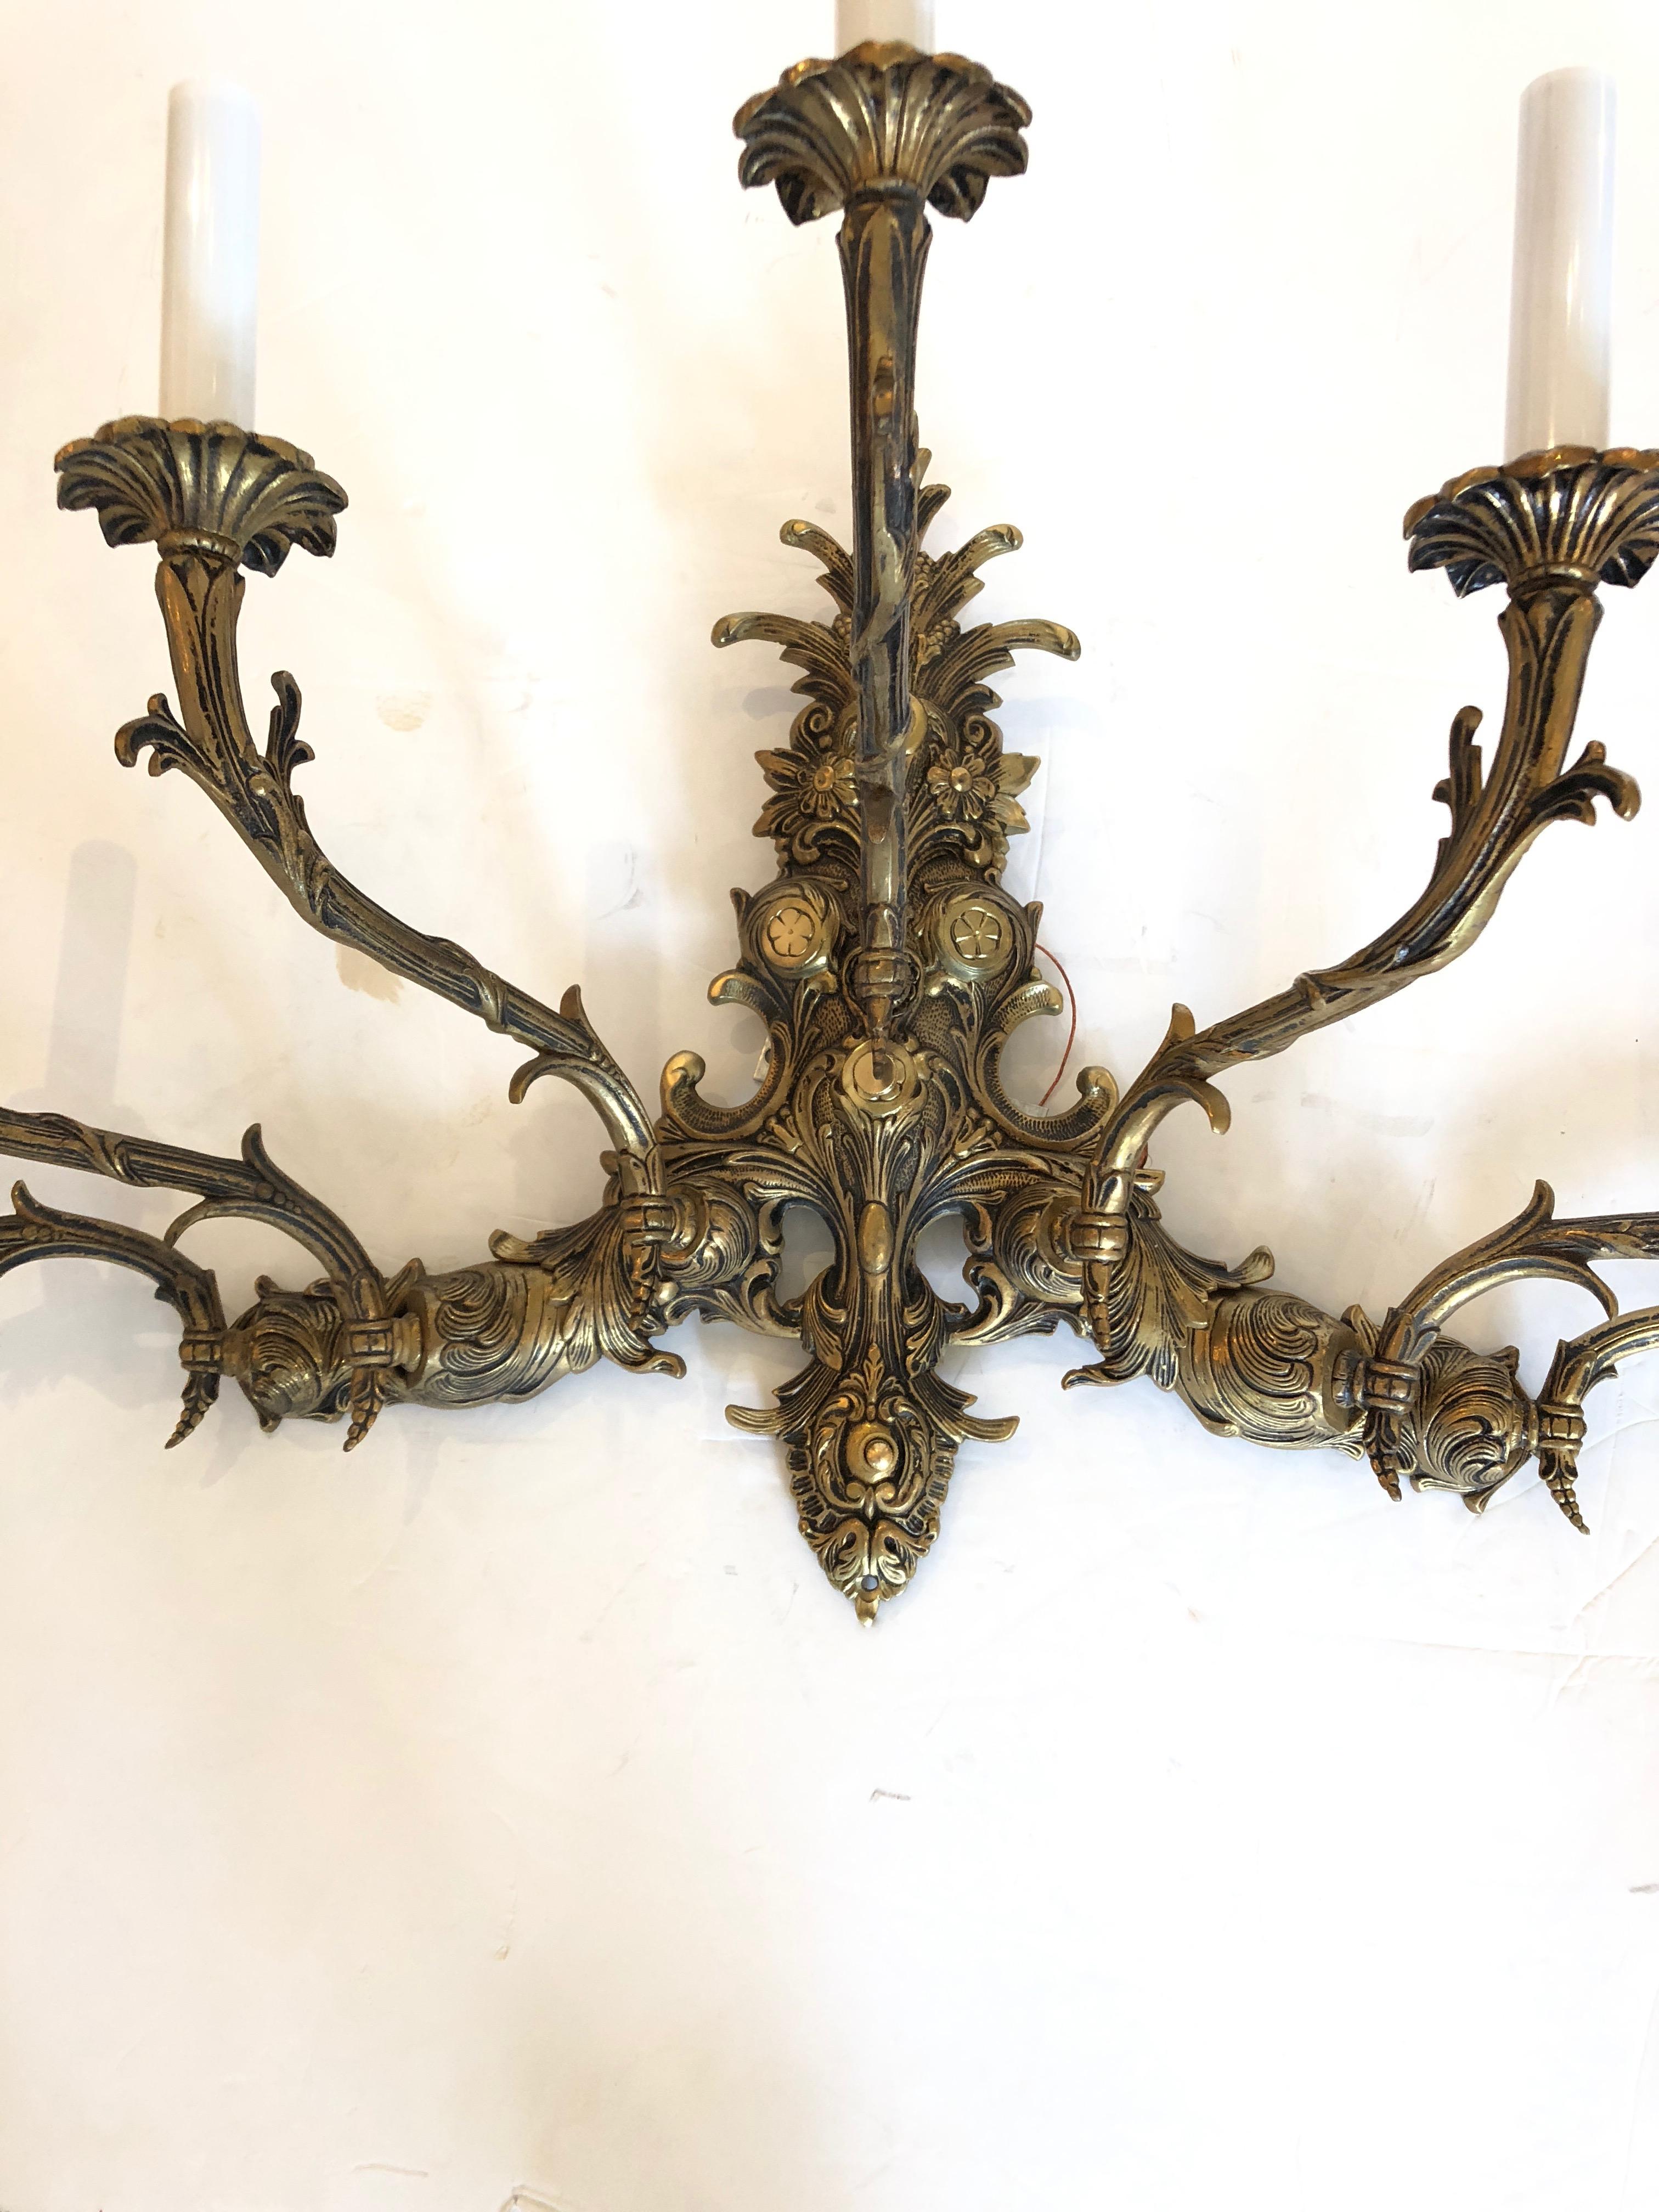 Beautiful ornately carved large vintage wall sconce from Spain having 7 candelabra arms, newly wired and ready to install.